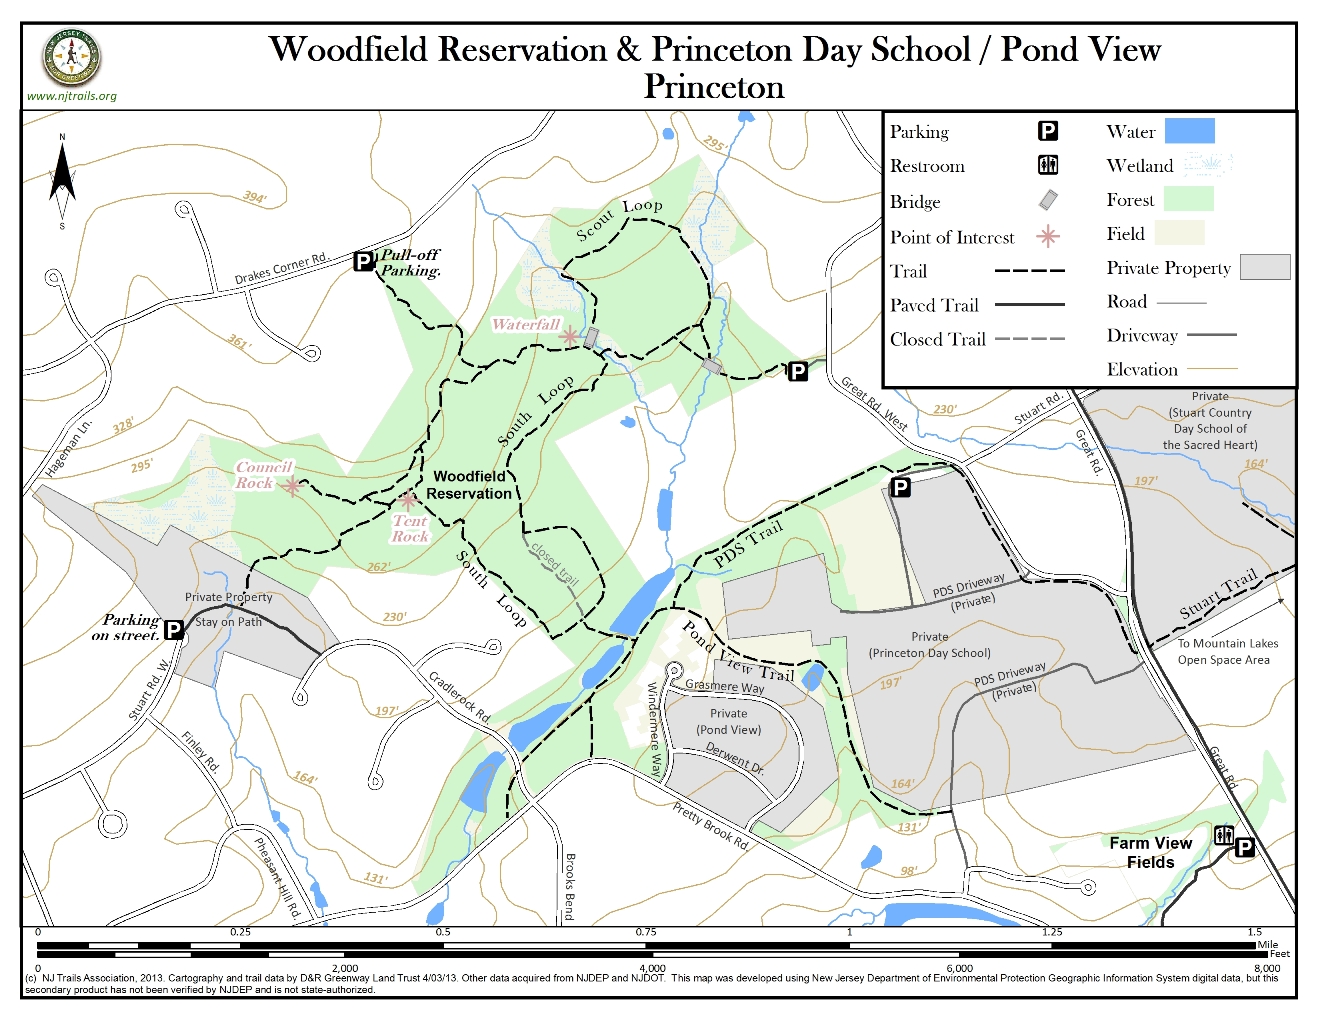 Woodfield Reservation & Princeton Day School/Pond View